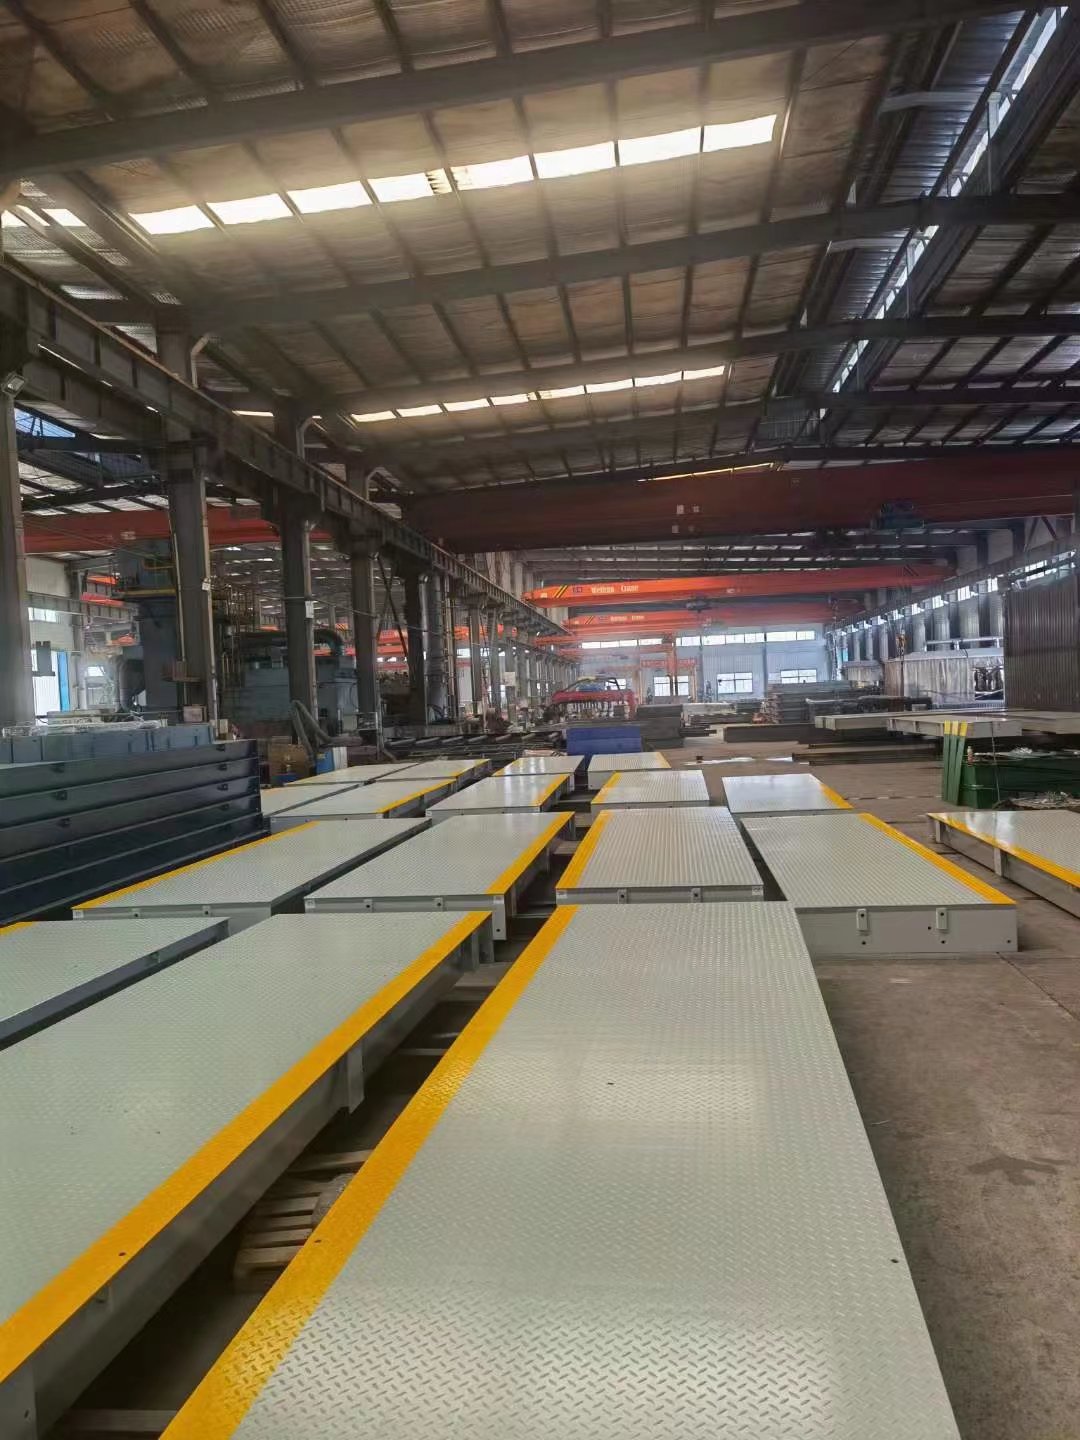 Electronic truck scale, electronic floor scale, electronic platform scale, electronic hook scale, electronic platform scale, stainless steel weight, cast iron weight and other weighing products